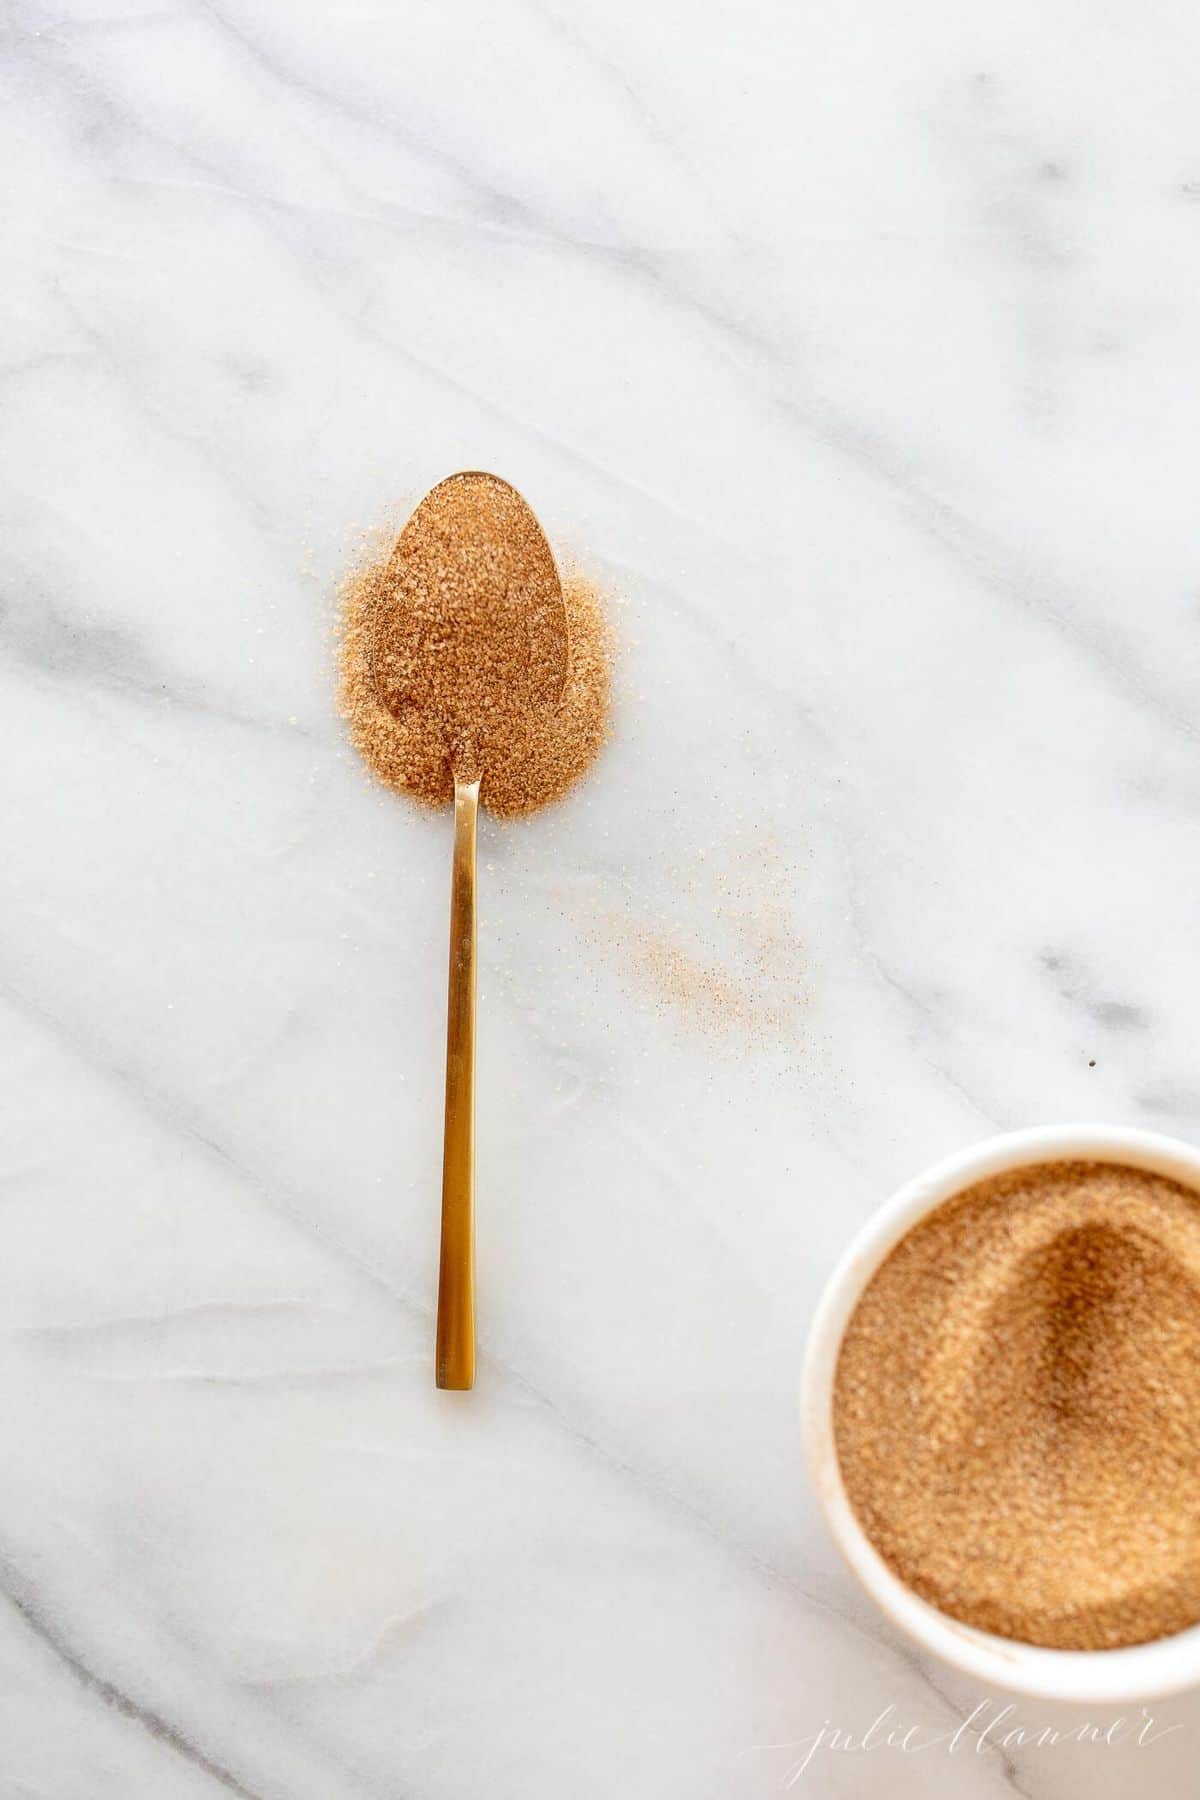 White marble surface, gold spoonful of cinnamon sugar recipe messy on the counter.